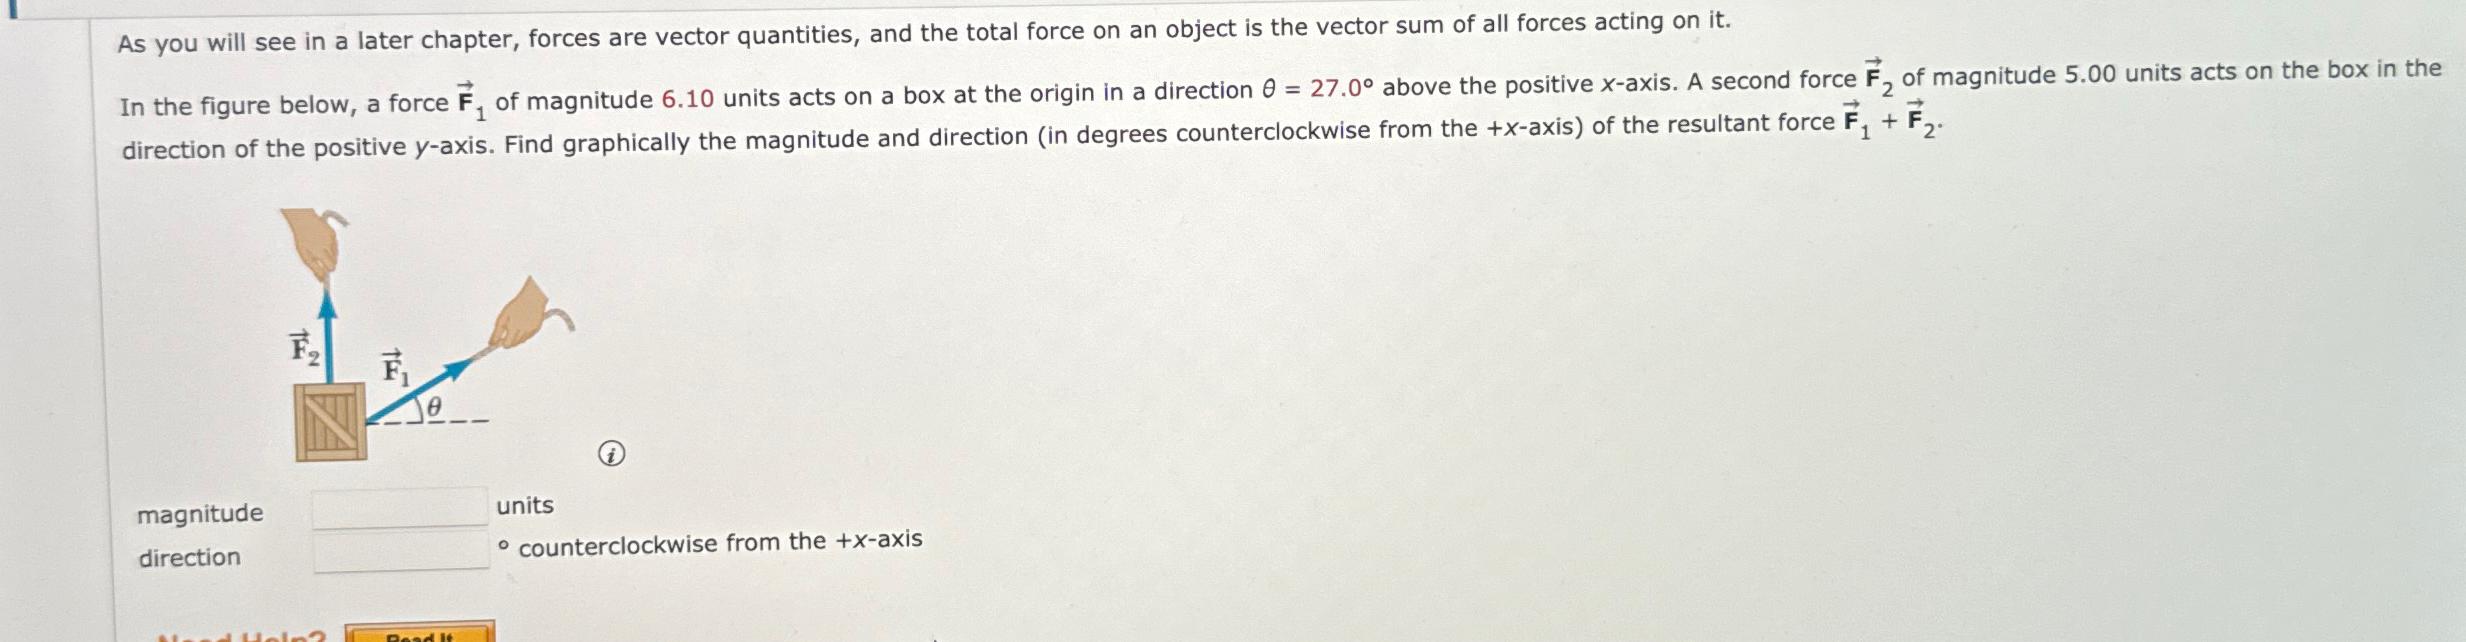 As you will see in a later chapter, forces are vector quantities, and the total force on an object is the